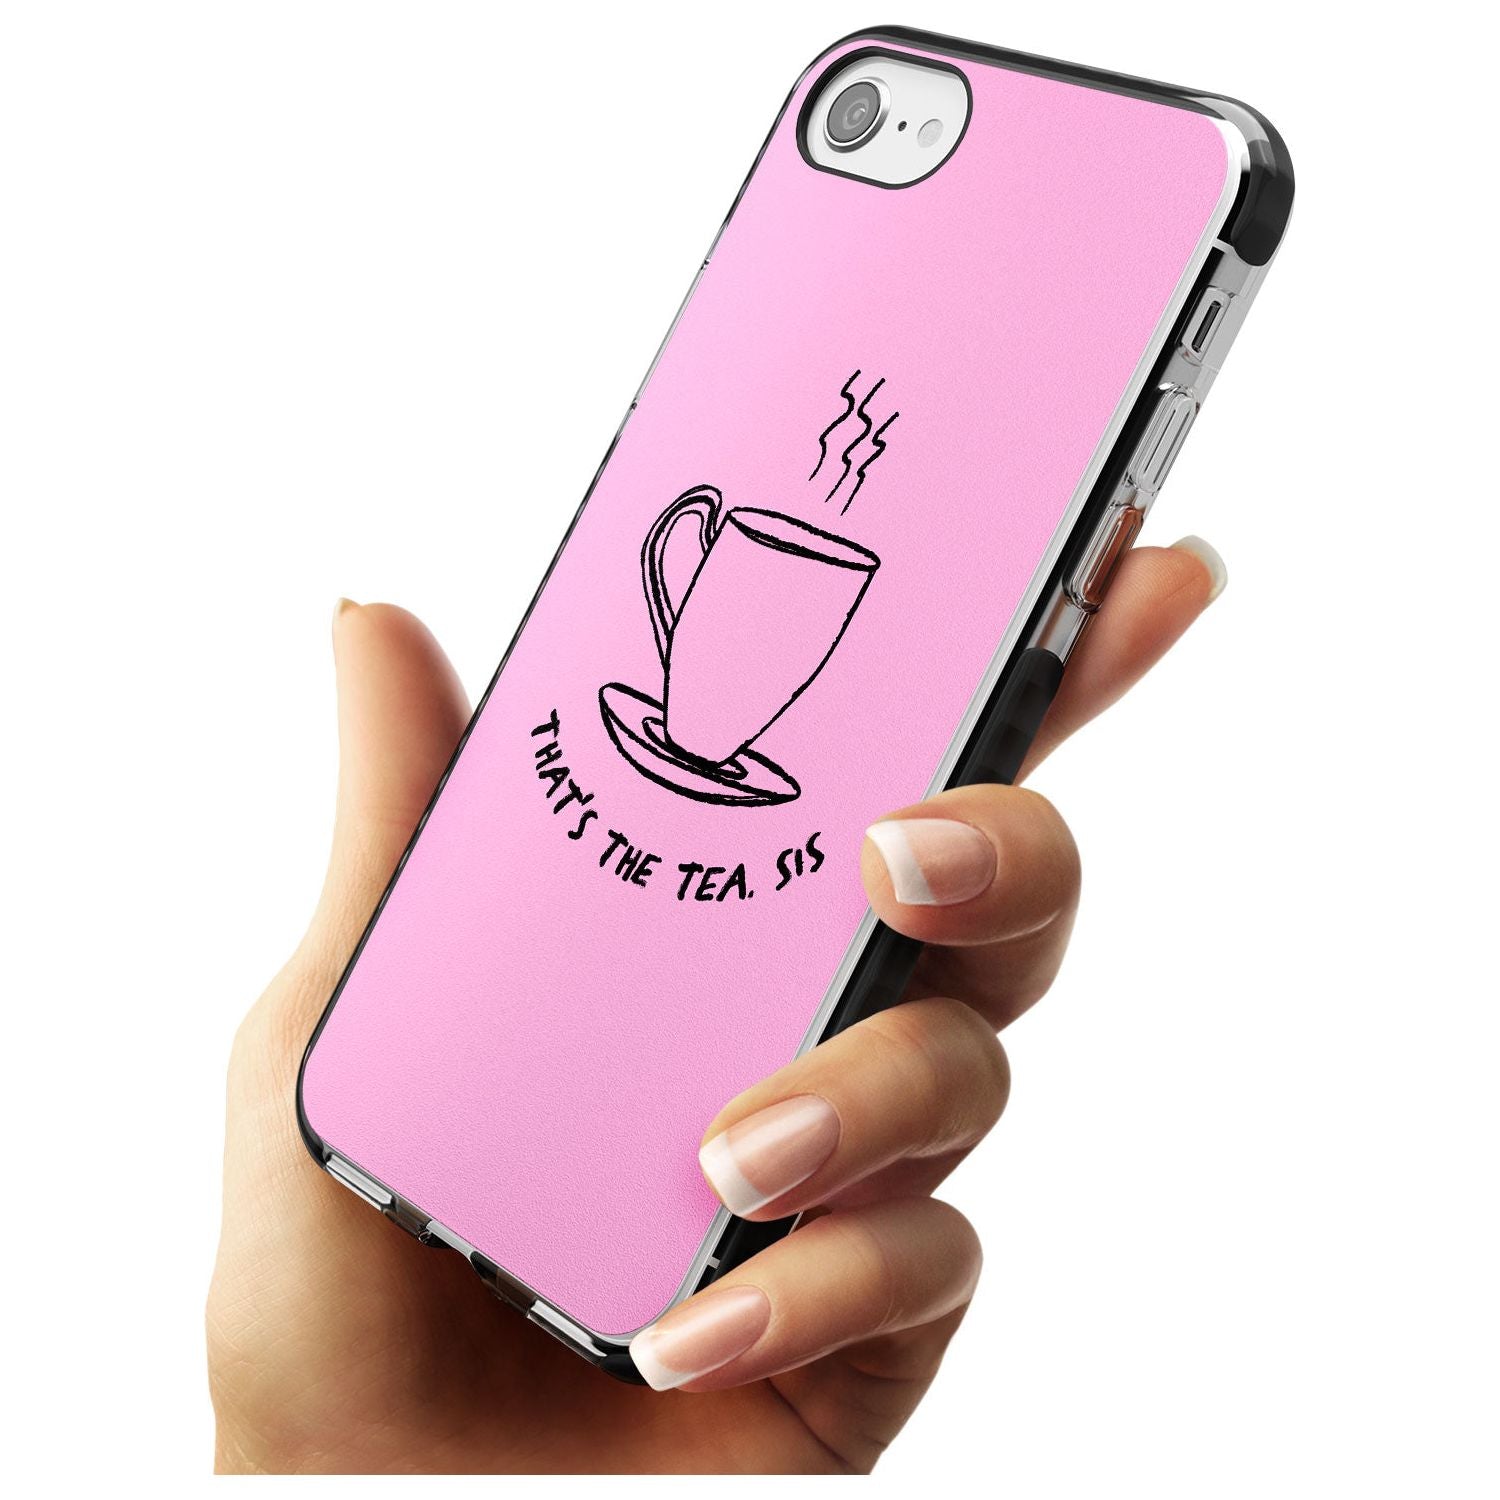 That's the Tea, Sis Pink Black Impact Phone Case for iPhone SE 8 7 Plus